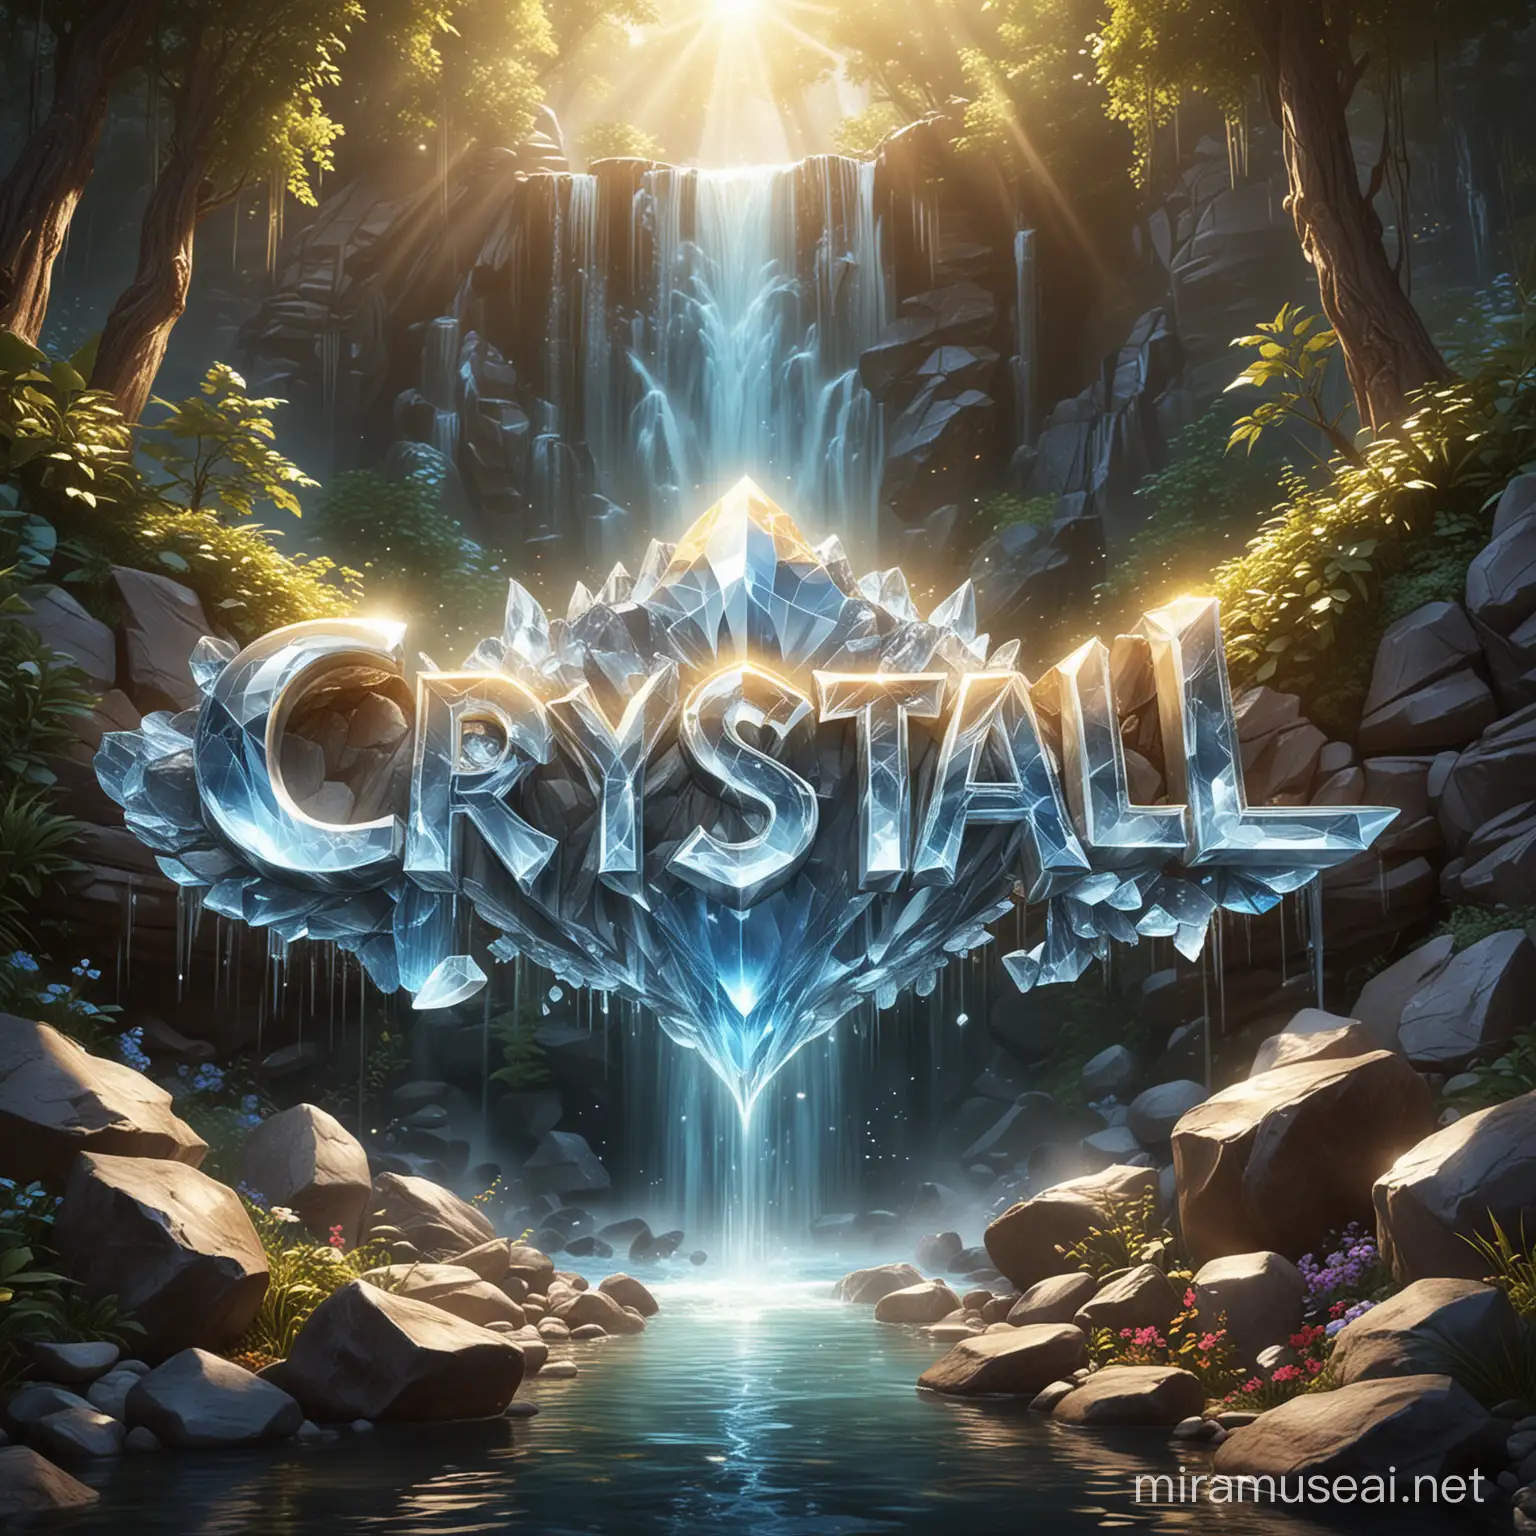 he word "Crystal" is elegantly inscribed in gleaming crystals, set in the enchanting style of Sunfire Summit art. Surrounded by radiant light beams and backed by a majestic waterfall, this design exudes the essence of a game logo, ideal for a captivating mobile game background.